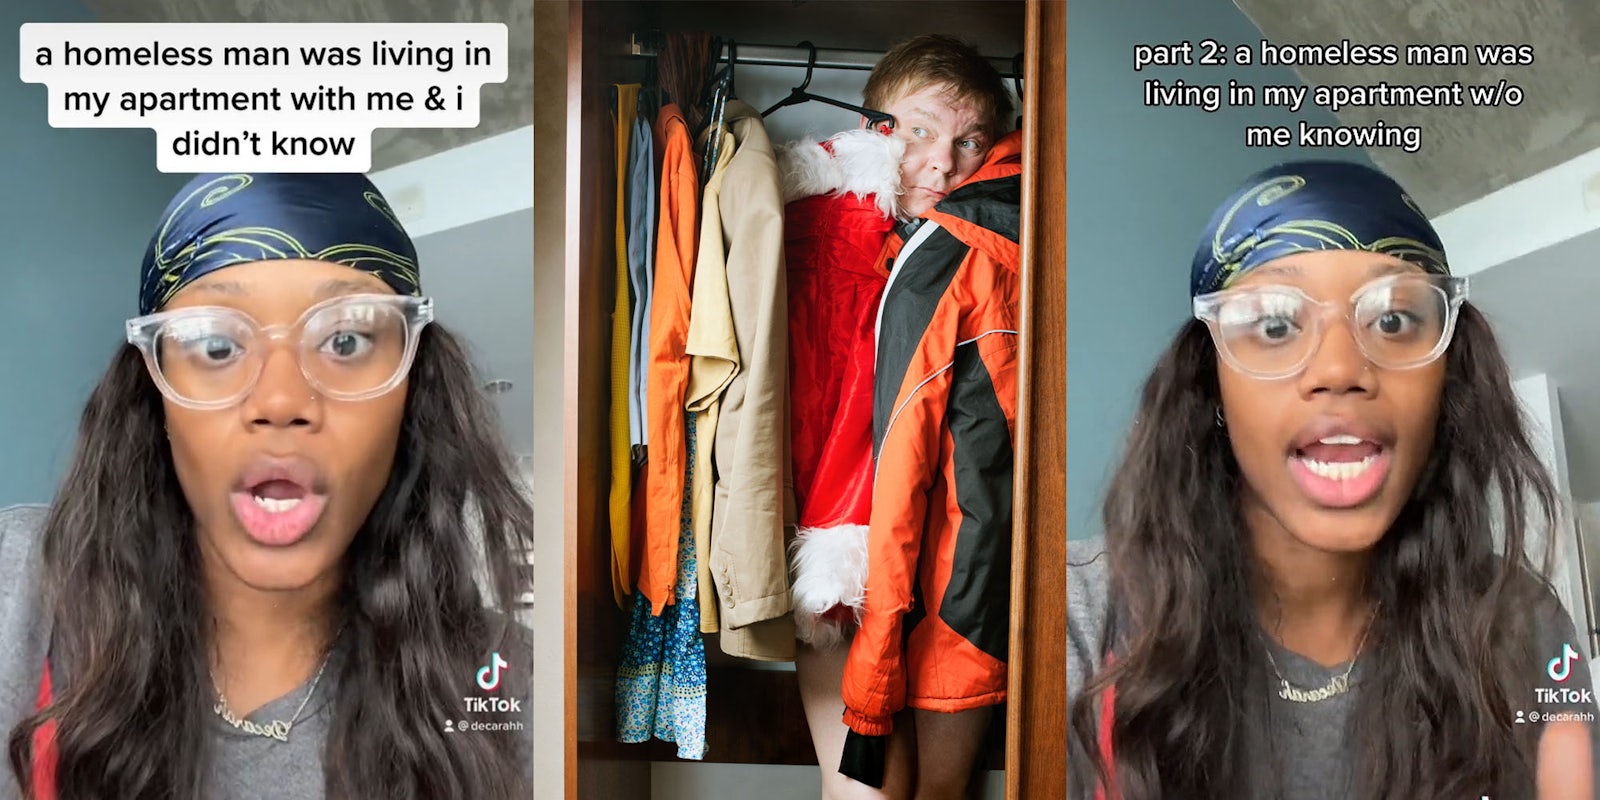 woman speaking caption 'a homeless man was living in my apartment with me & i didn't know' (l) man in closet poking head out (c) woman speaking caption 'part:2 a homeless man was living in my apartment w/o me knowing' (r)